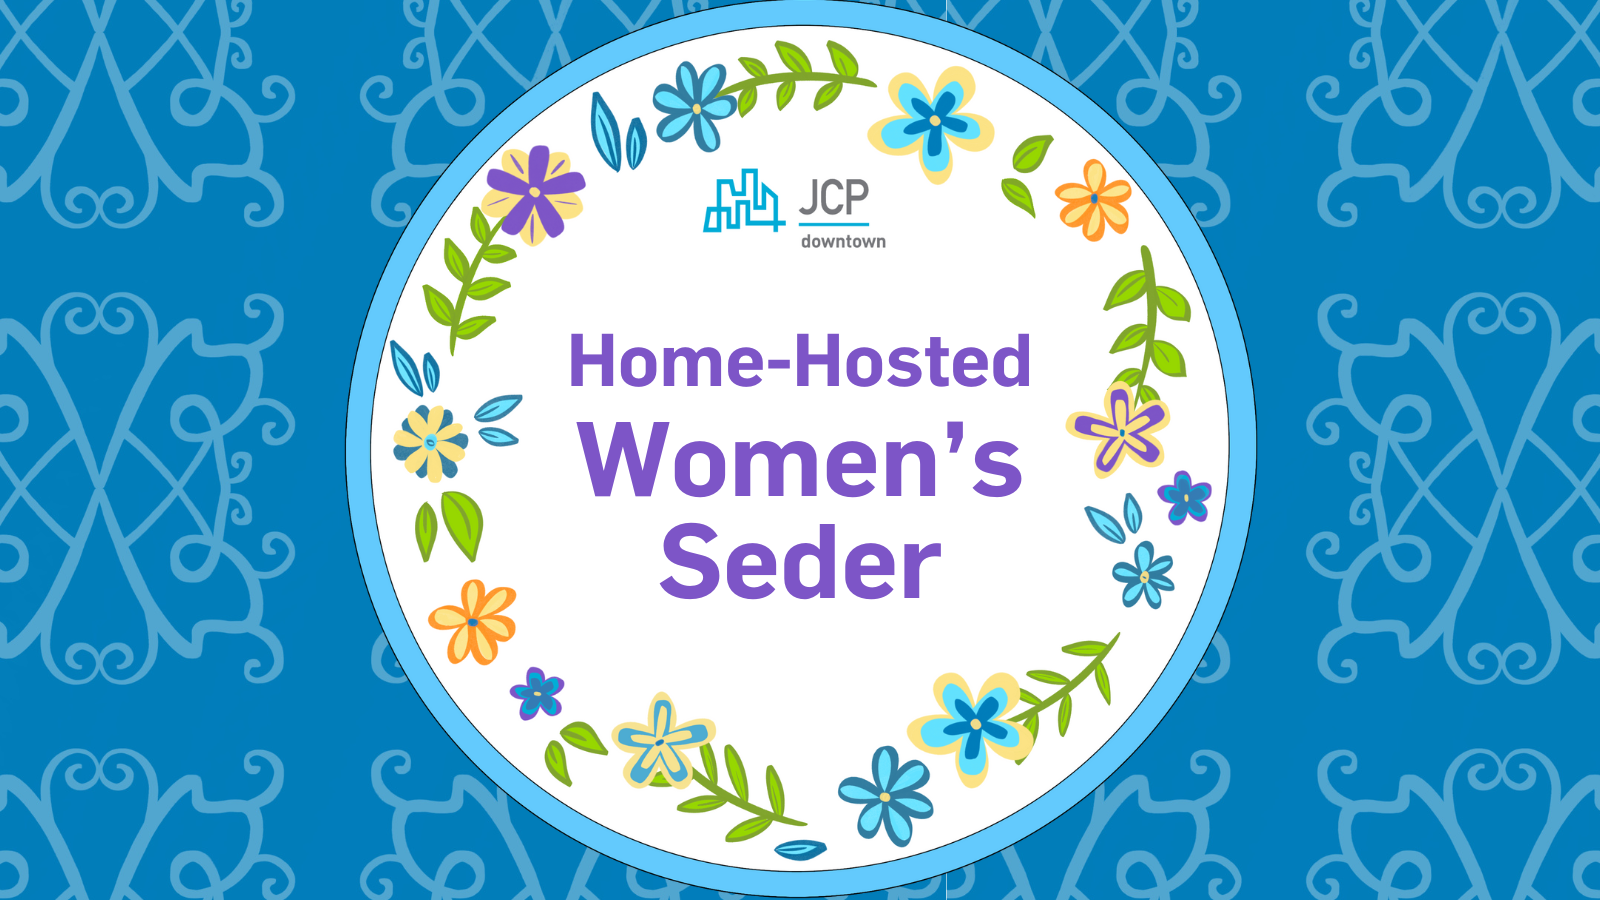 Home-Hosted Women’s Seder